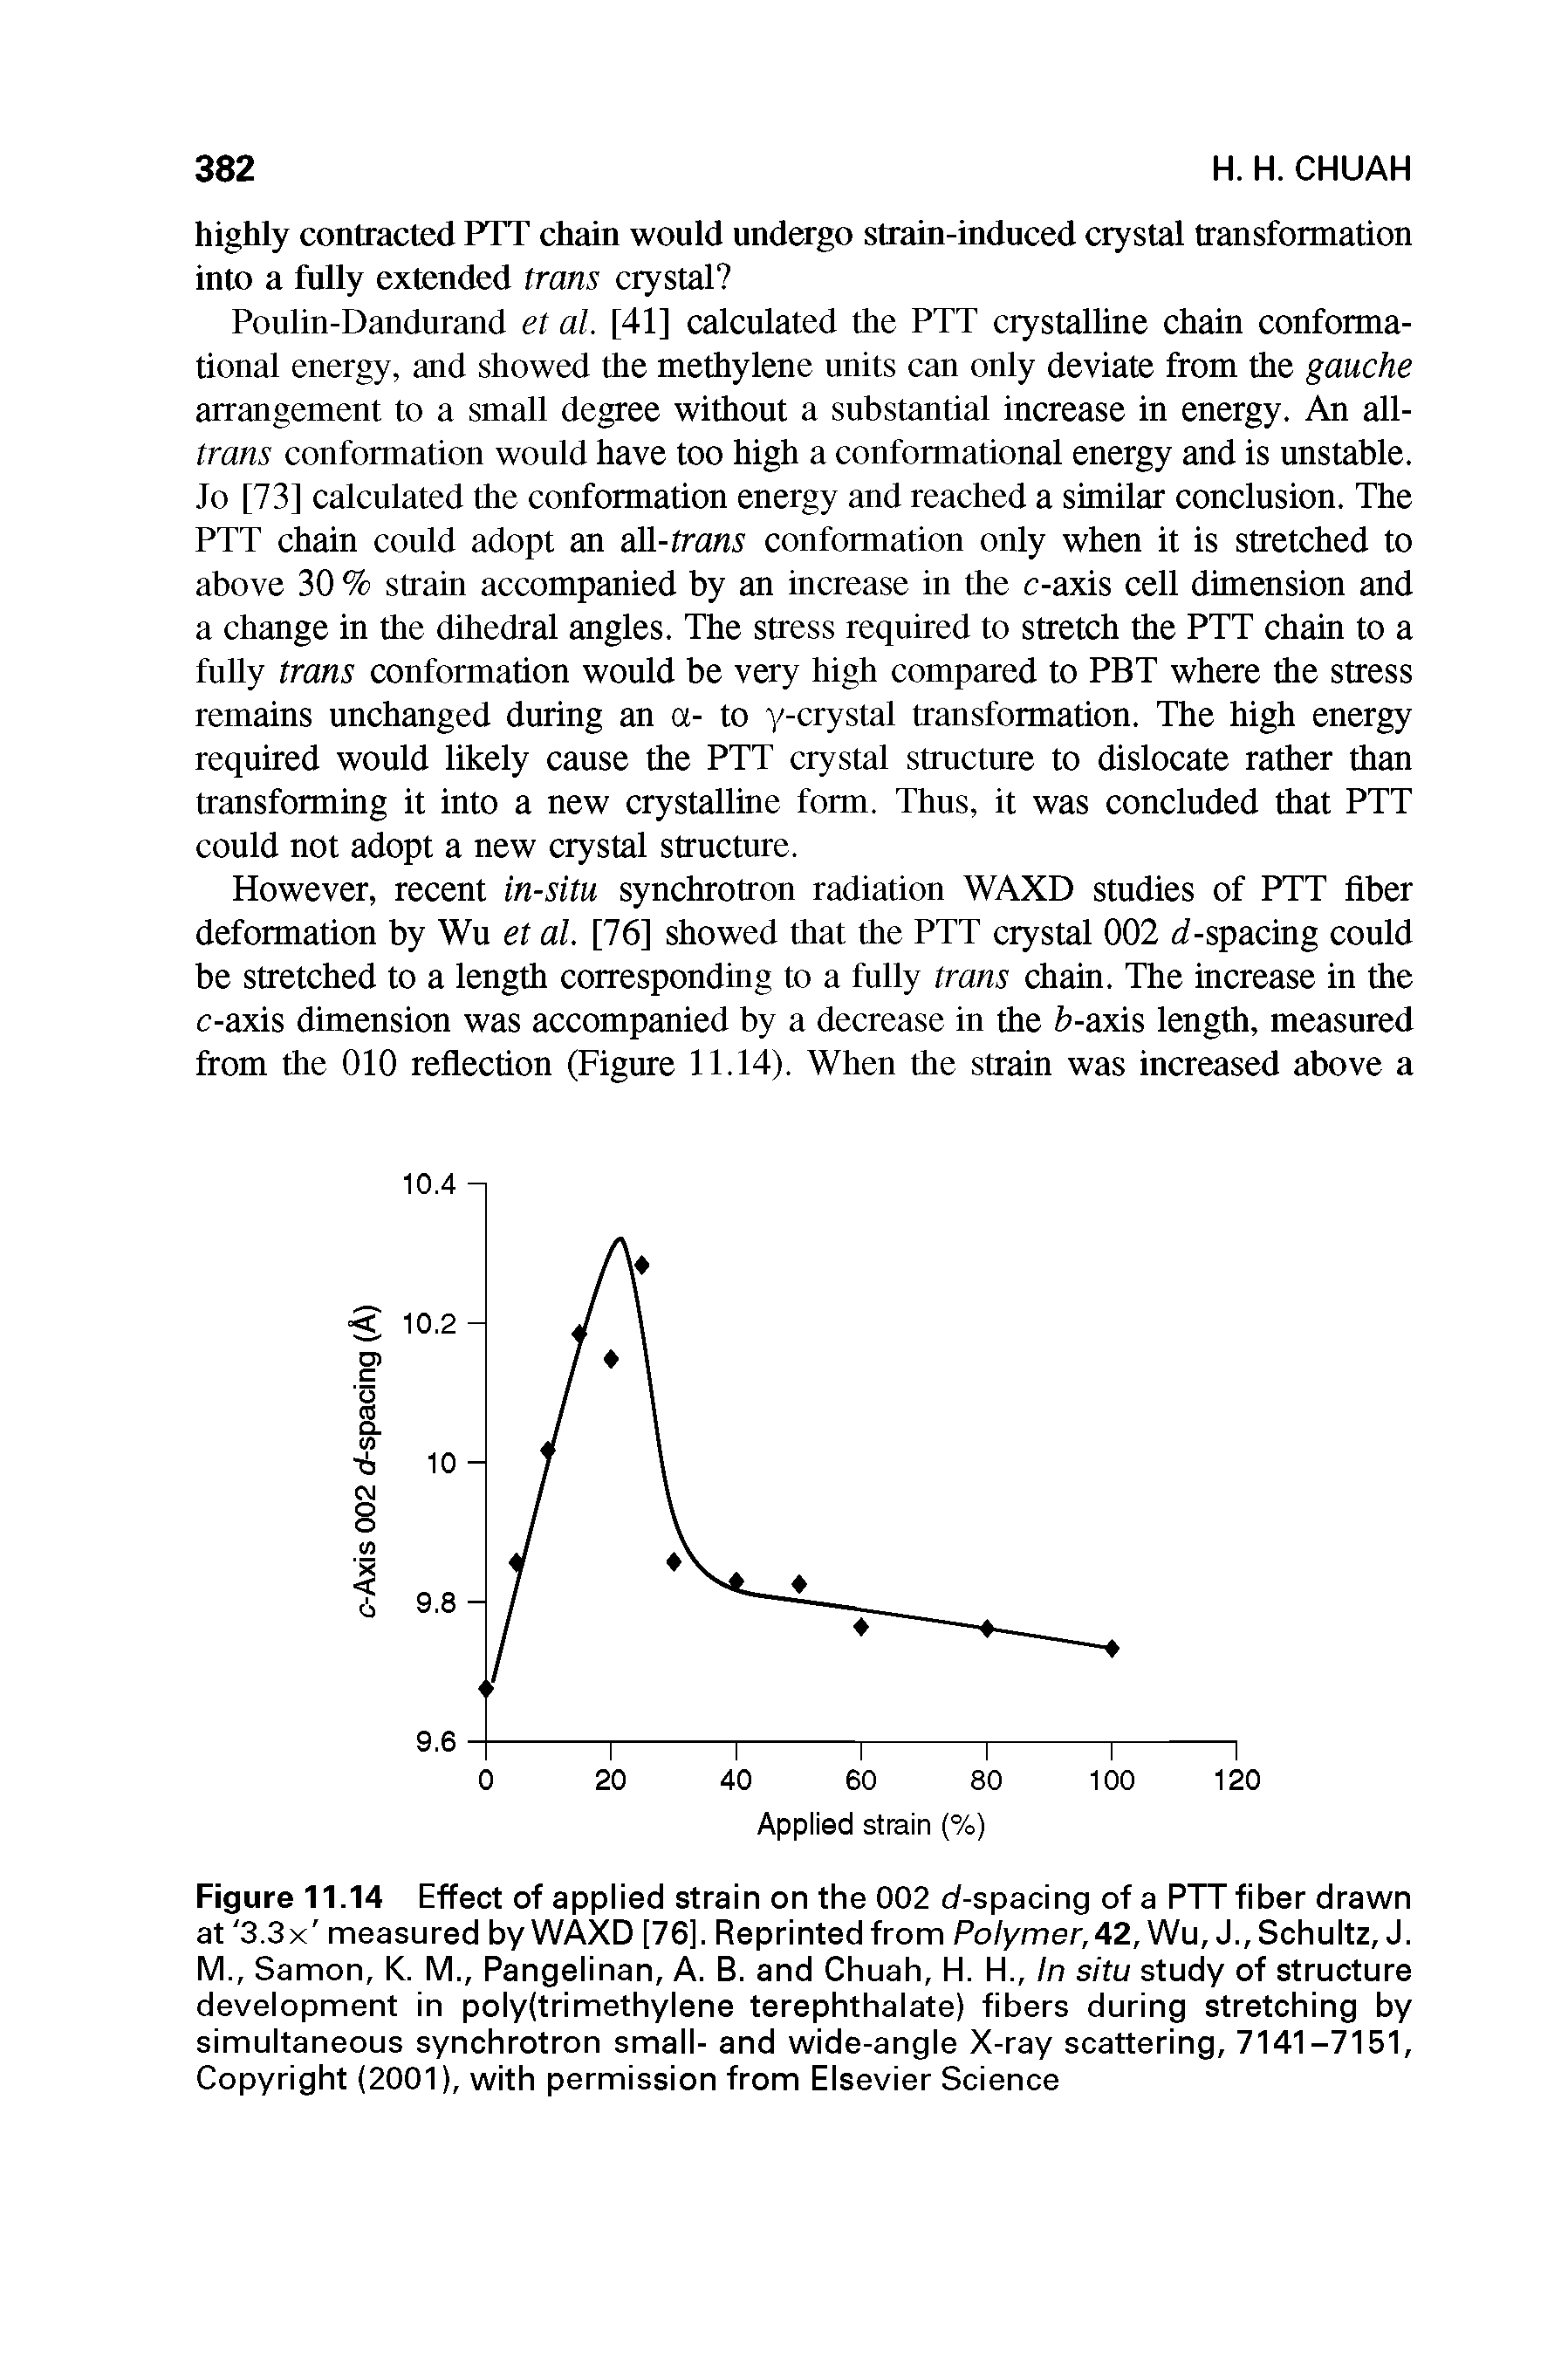 Figure 11.14 Effect of applied strain on the 002 d-spacing of a PTT fiber drawn at 3.3 x measured by WAXD [76], Reprinted from Polymer, 42, Wu, J., Schultz, J. M., Samon, K. M., Pangelinan, A. B. and Chuah, H. H., In situ study of structure development in poly(trimethylene terephthalate) fibers during stretching by simultaneous synchrotron small- and wide-angle X-ray scattering, 7141-7151, Copyright (2001), with permission from Elsevier Science...